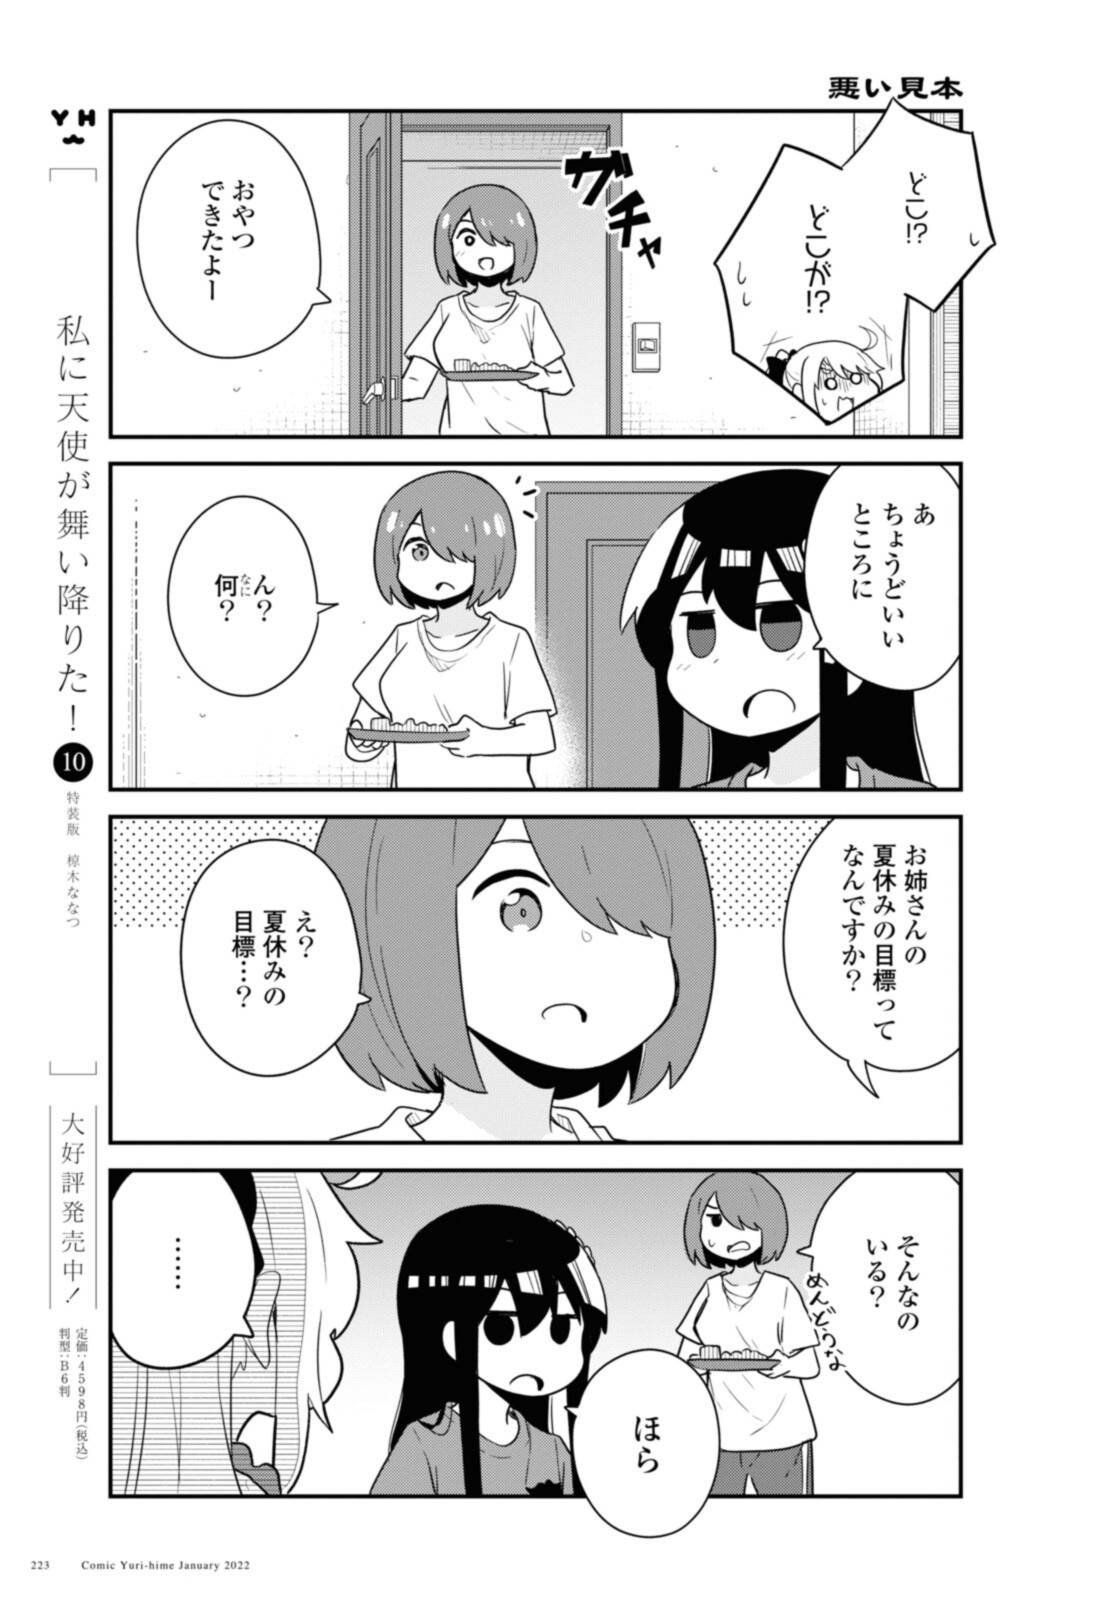 Wataten! An Angel Flew Down to Me 私に天使が舞い降りた！ 第91話 - Page 3